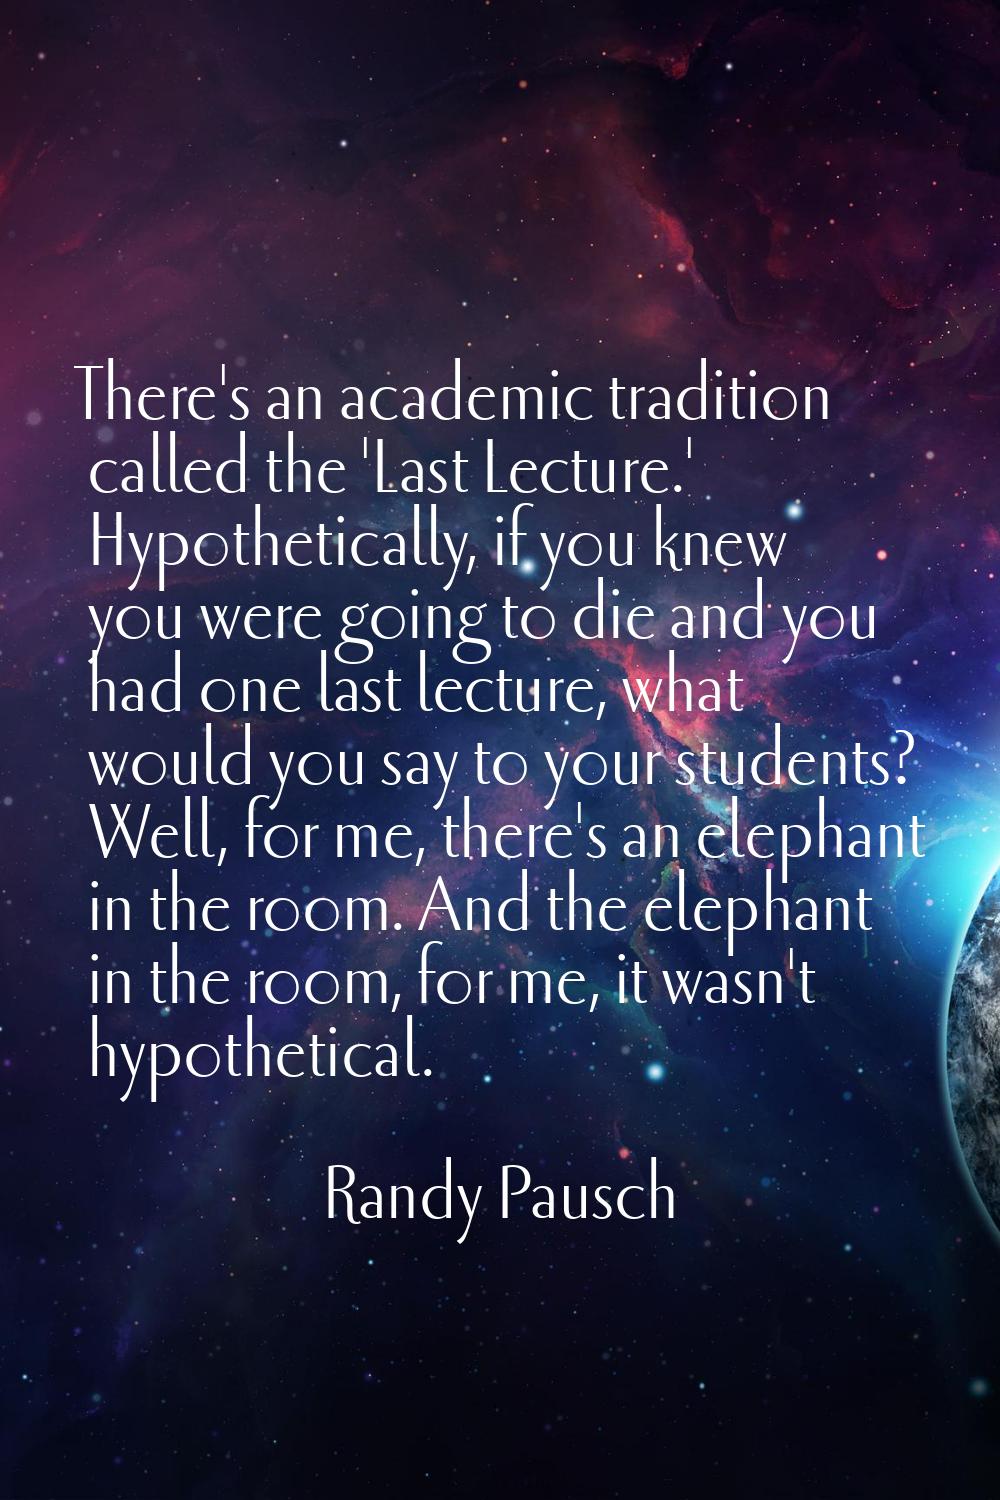 There's an academic tradition called the 'Last Lecture.' Hypothetically, if you knew you were going